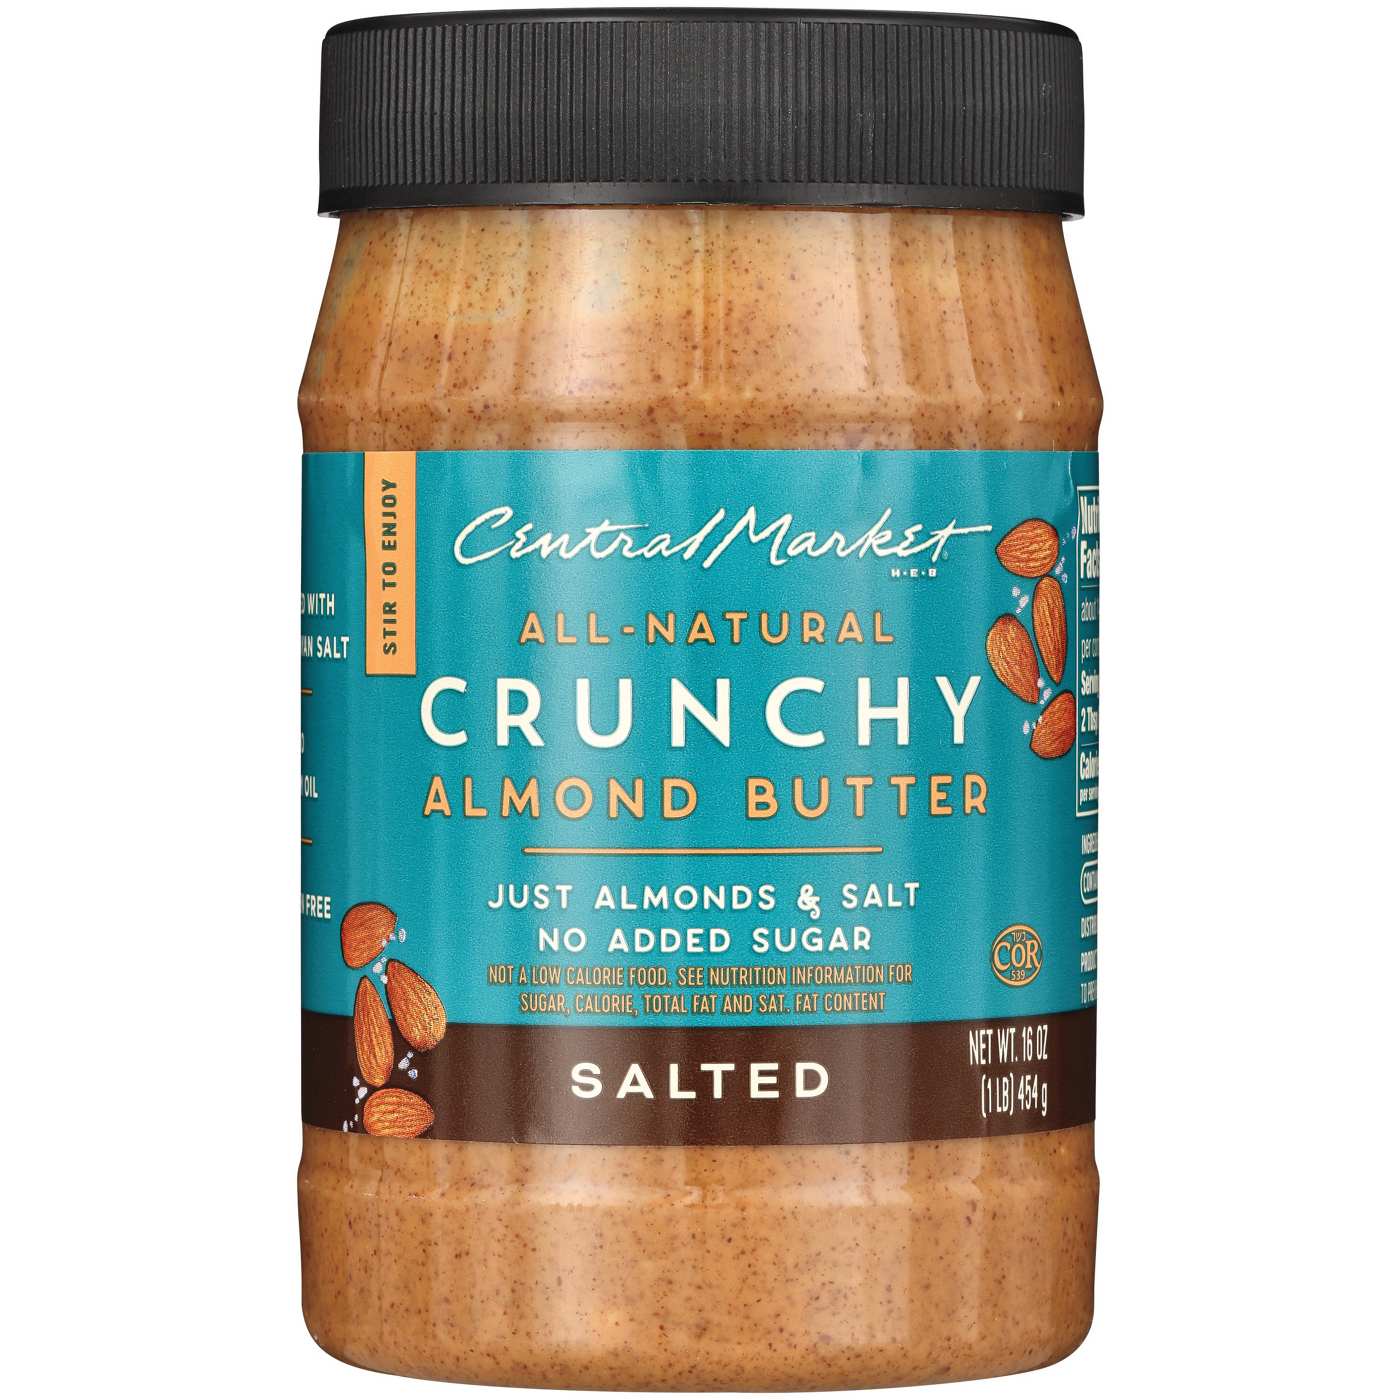 Central Market All-Natural Crunchy Almond Butter – Salted; image 1 of 2